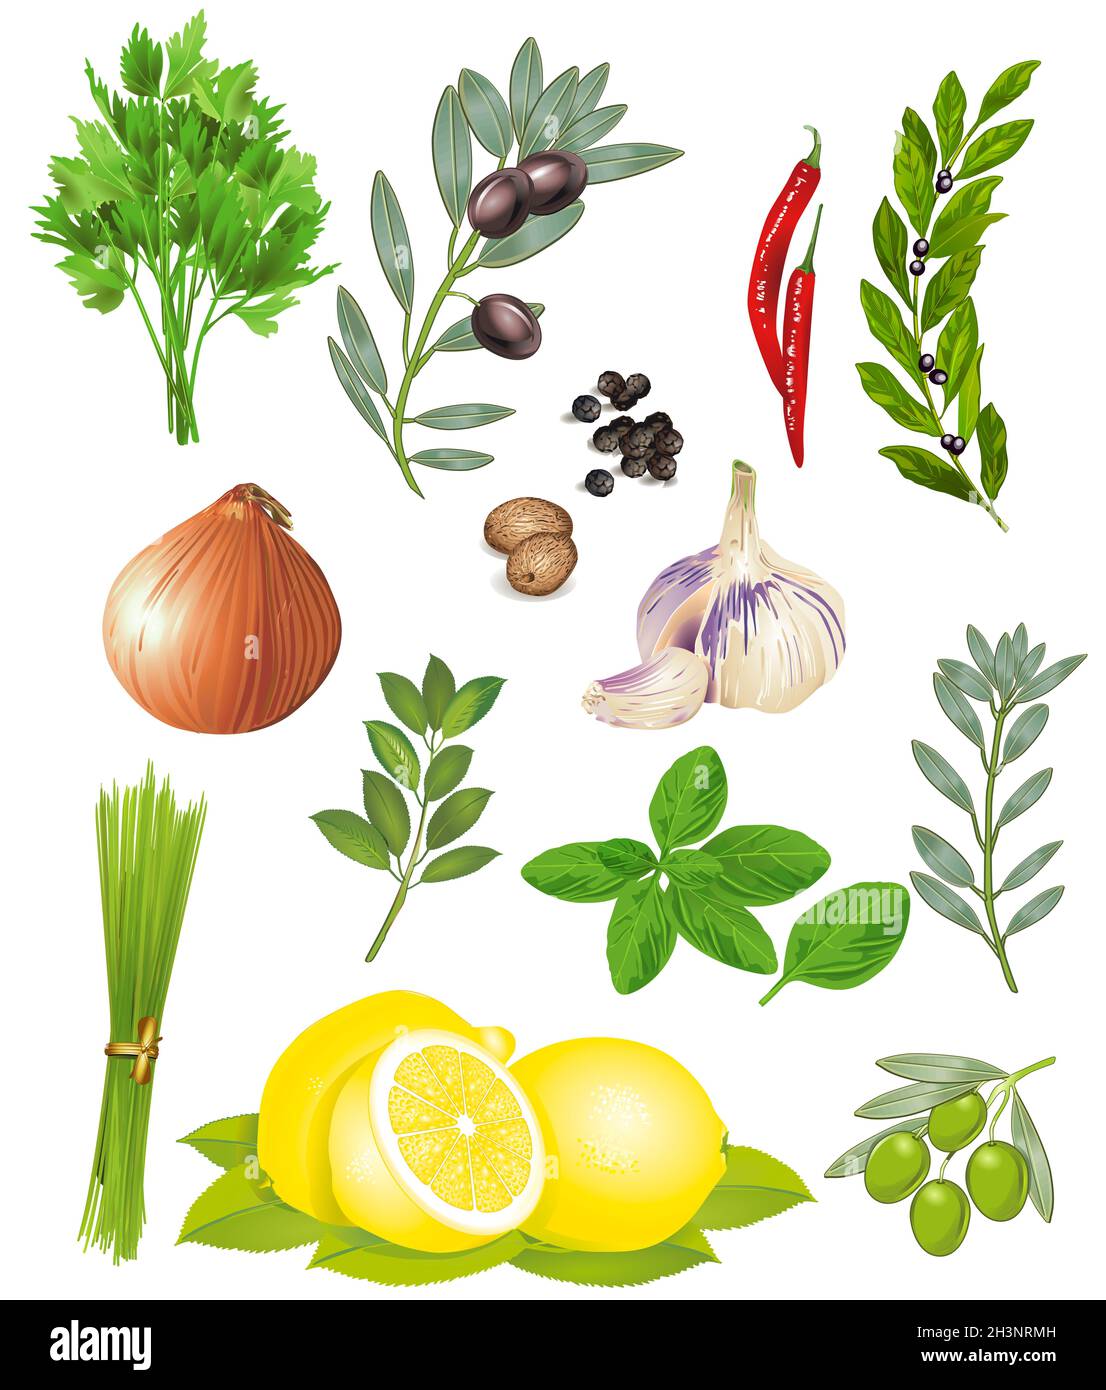 Spices and herbs -  illustration Stock Photo